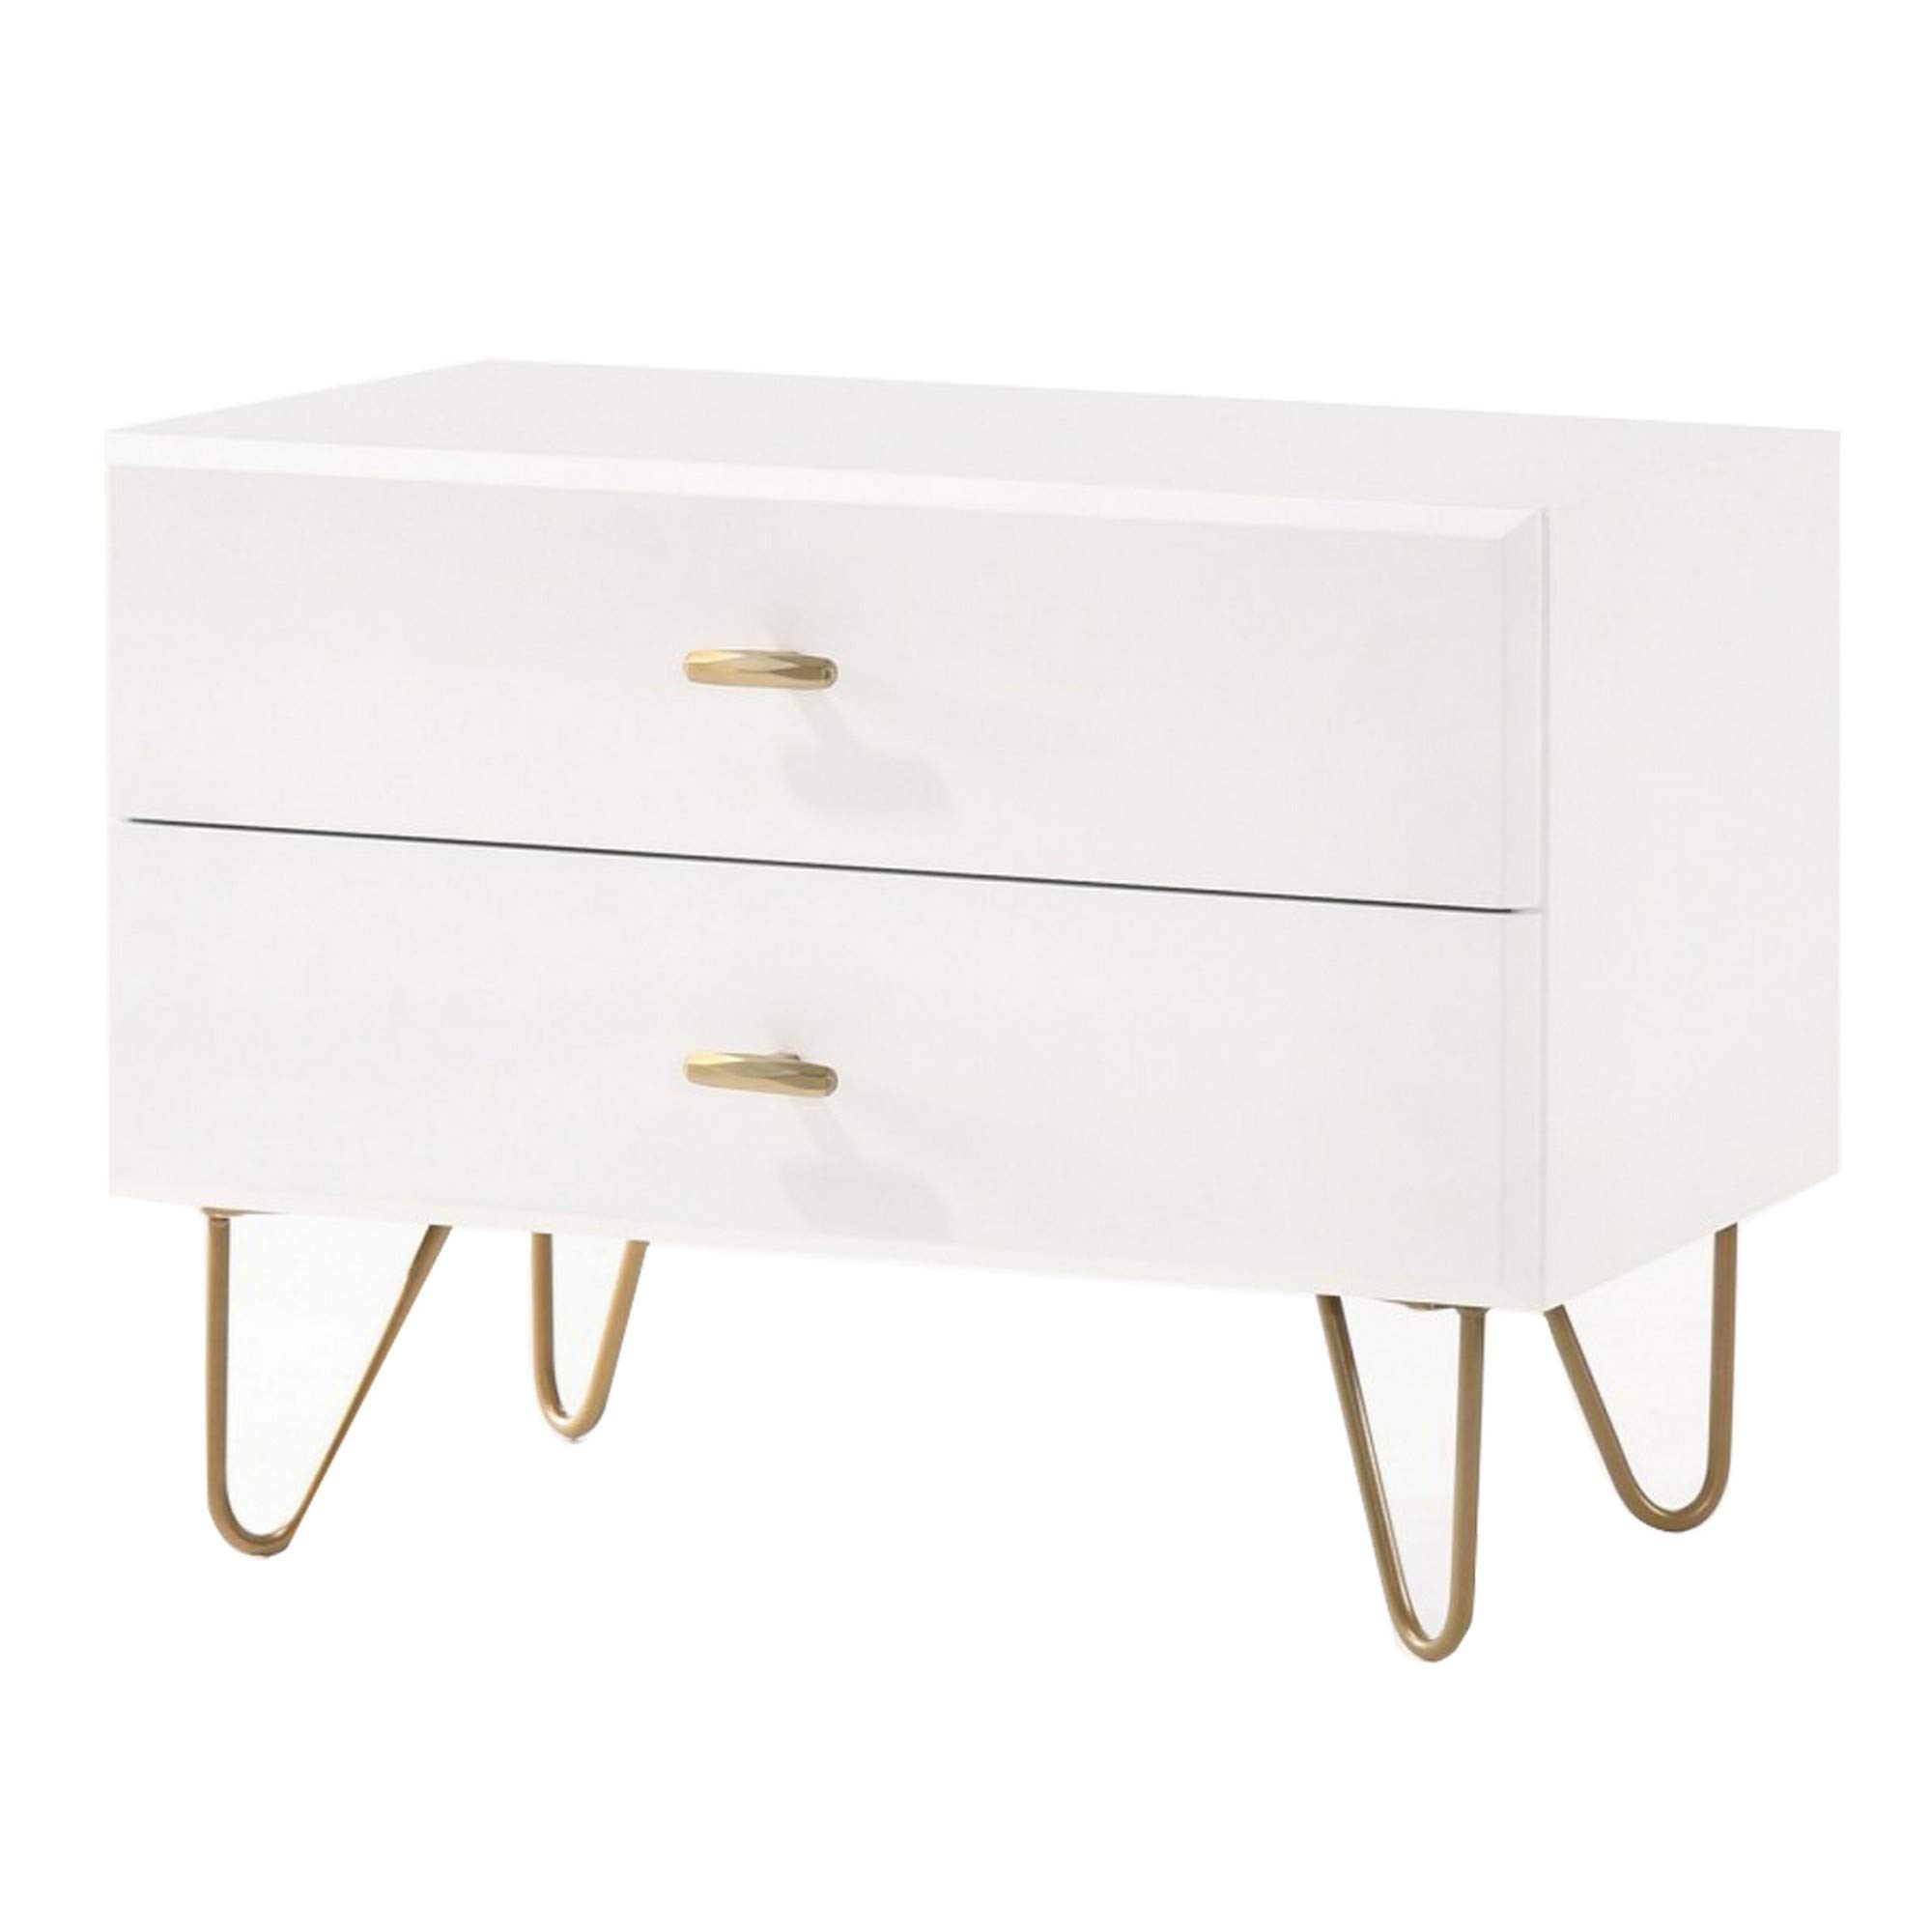 Benjara 2 Drawer Wooden Nightstand with Metal Pulls and Hairpin Legs, White and gold